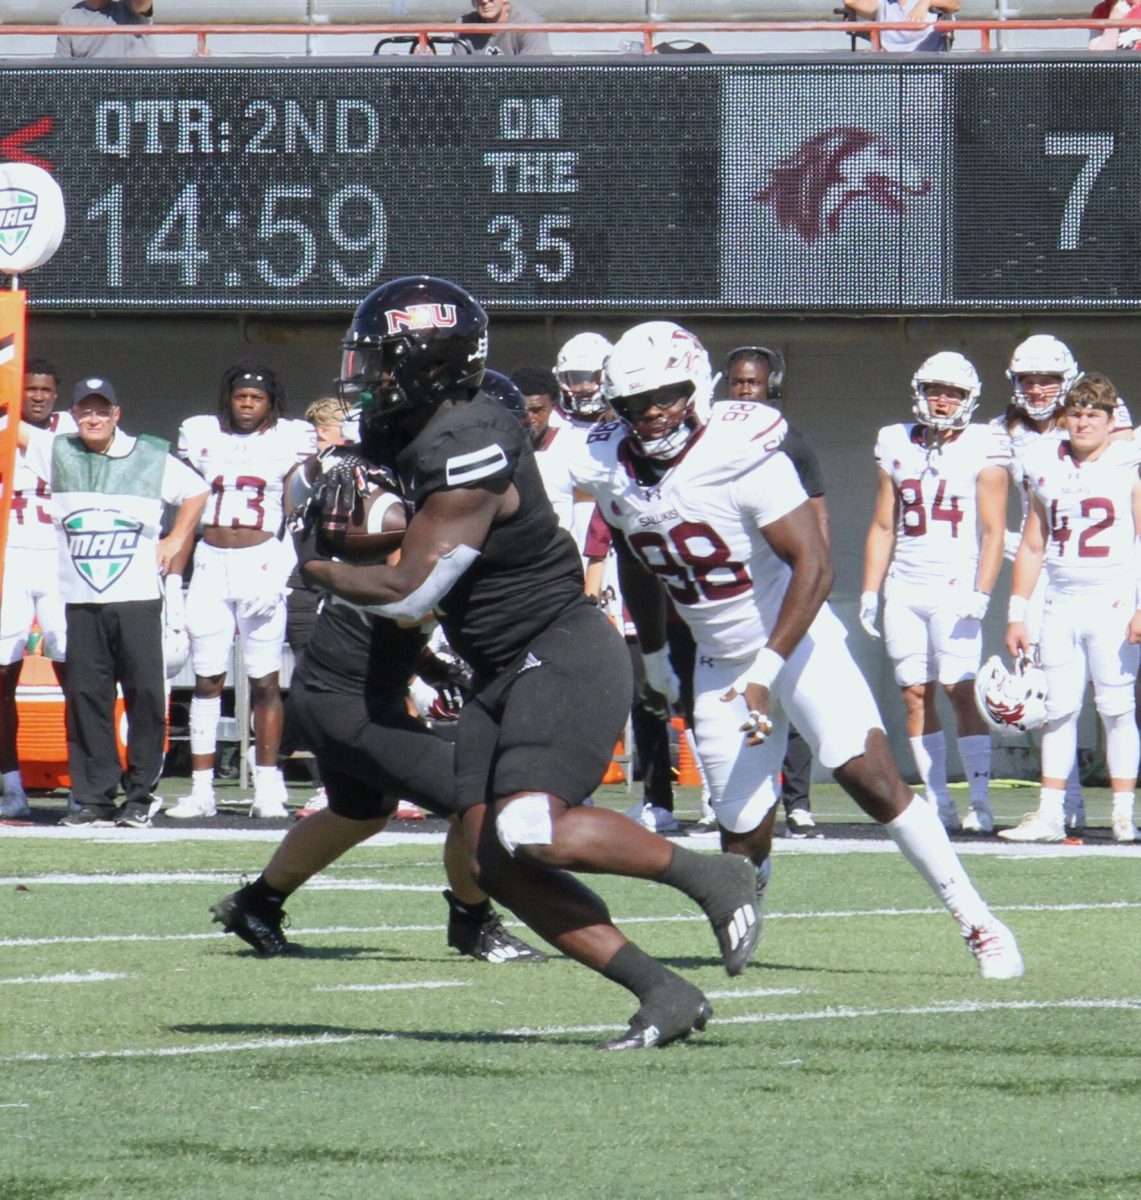 Junior running back Antario Brown (1), takes possession of the ball during the second quarter of the Huskies game against Southern Illinois University on Sept. 9. (Nyla Owens | Northern Star)